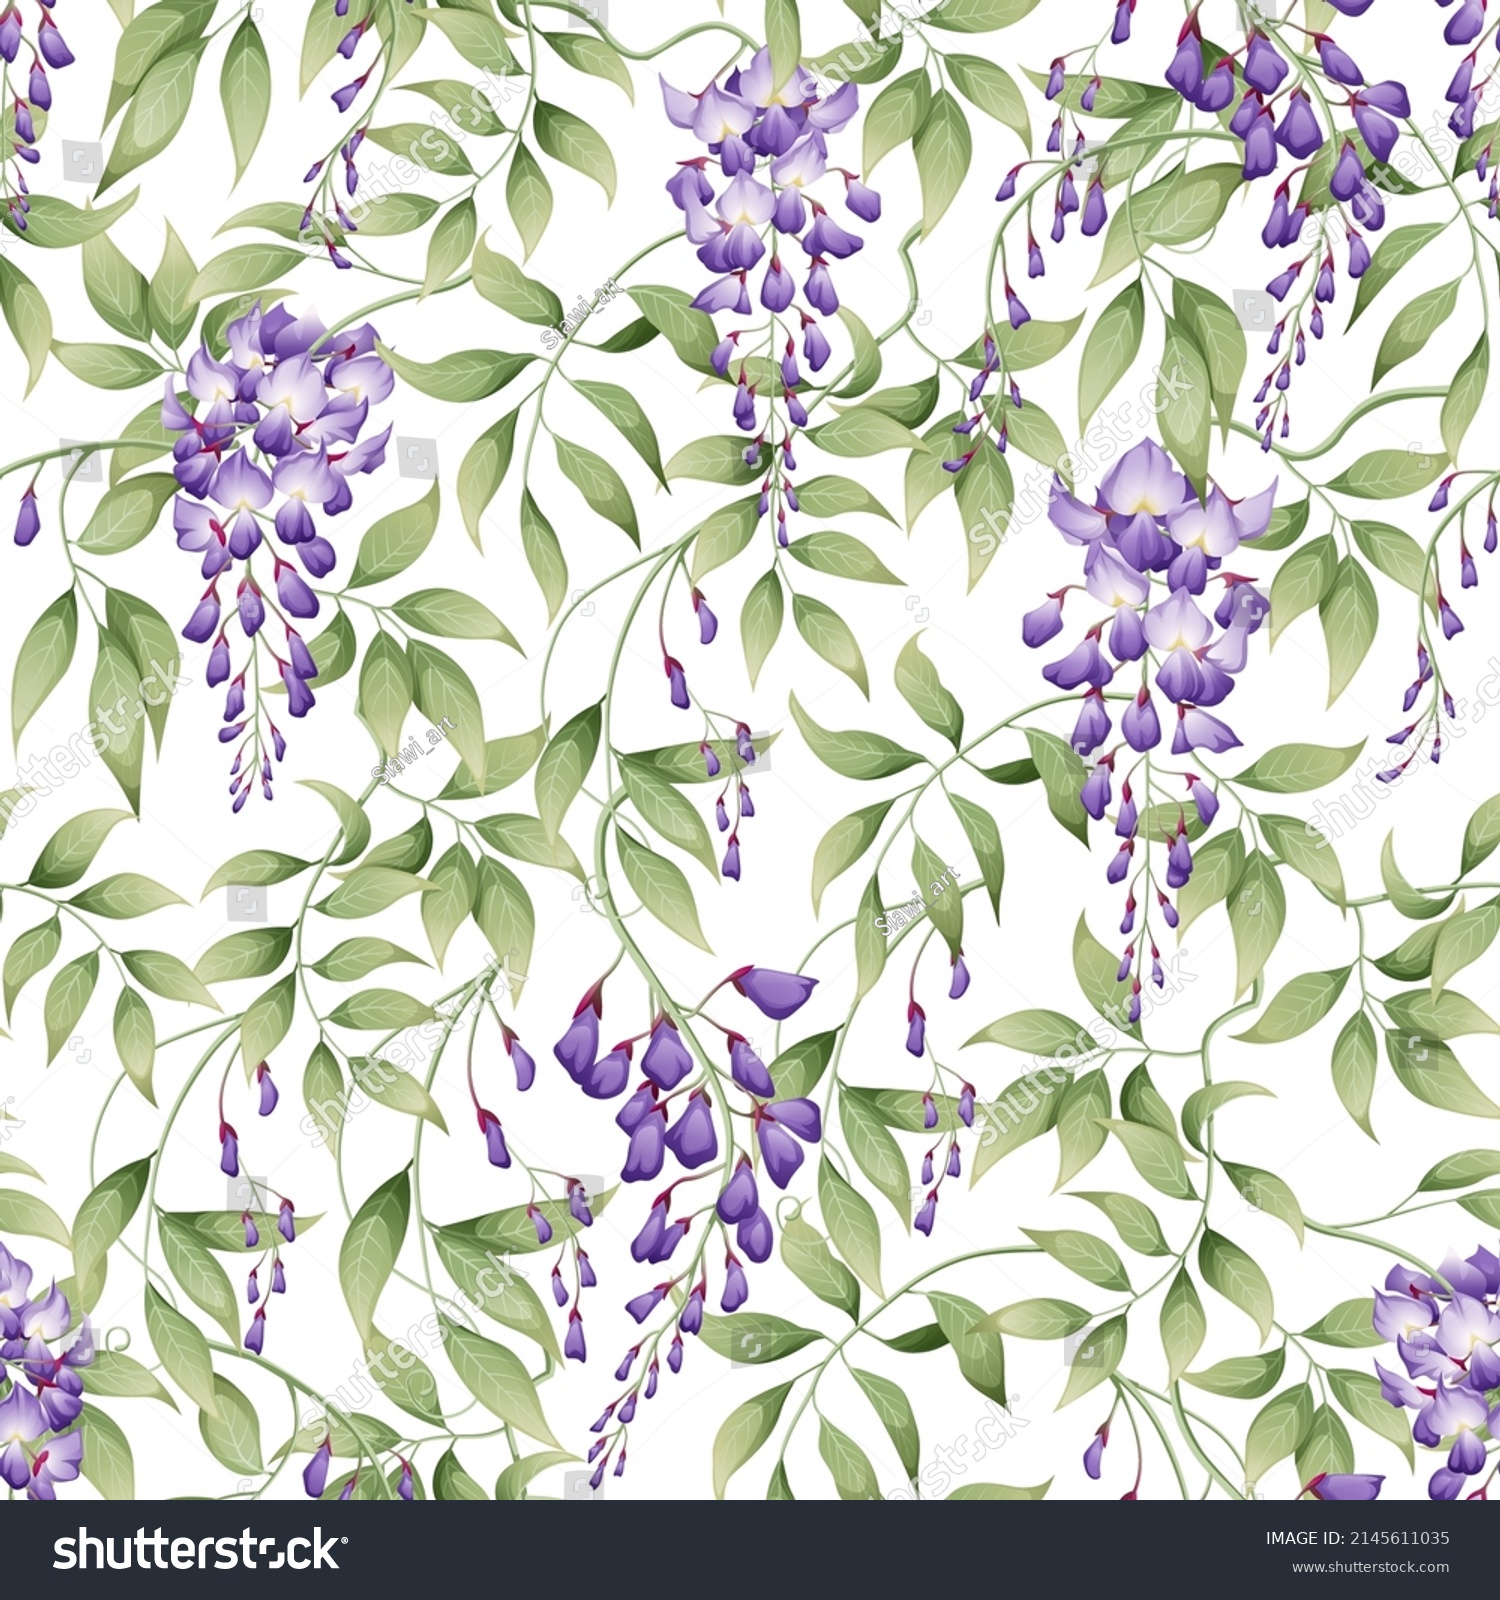 SVG of Seamless pattern with purple wisteria and green leaves on a white background. Great for textile, fabric, wrapping paper, wallpaper. svg